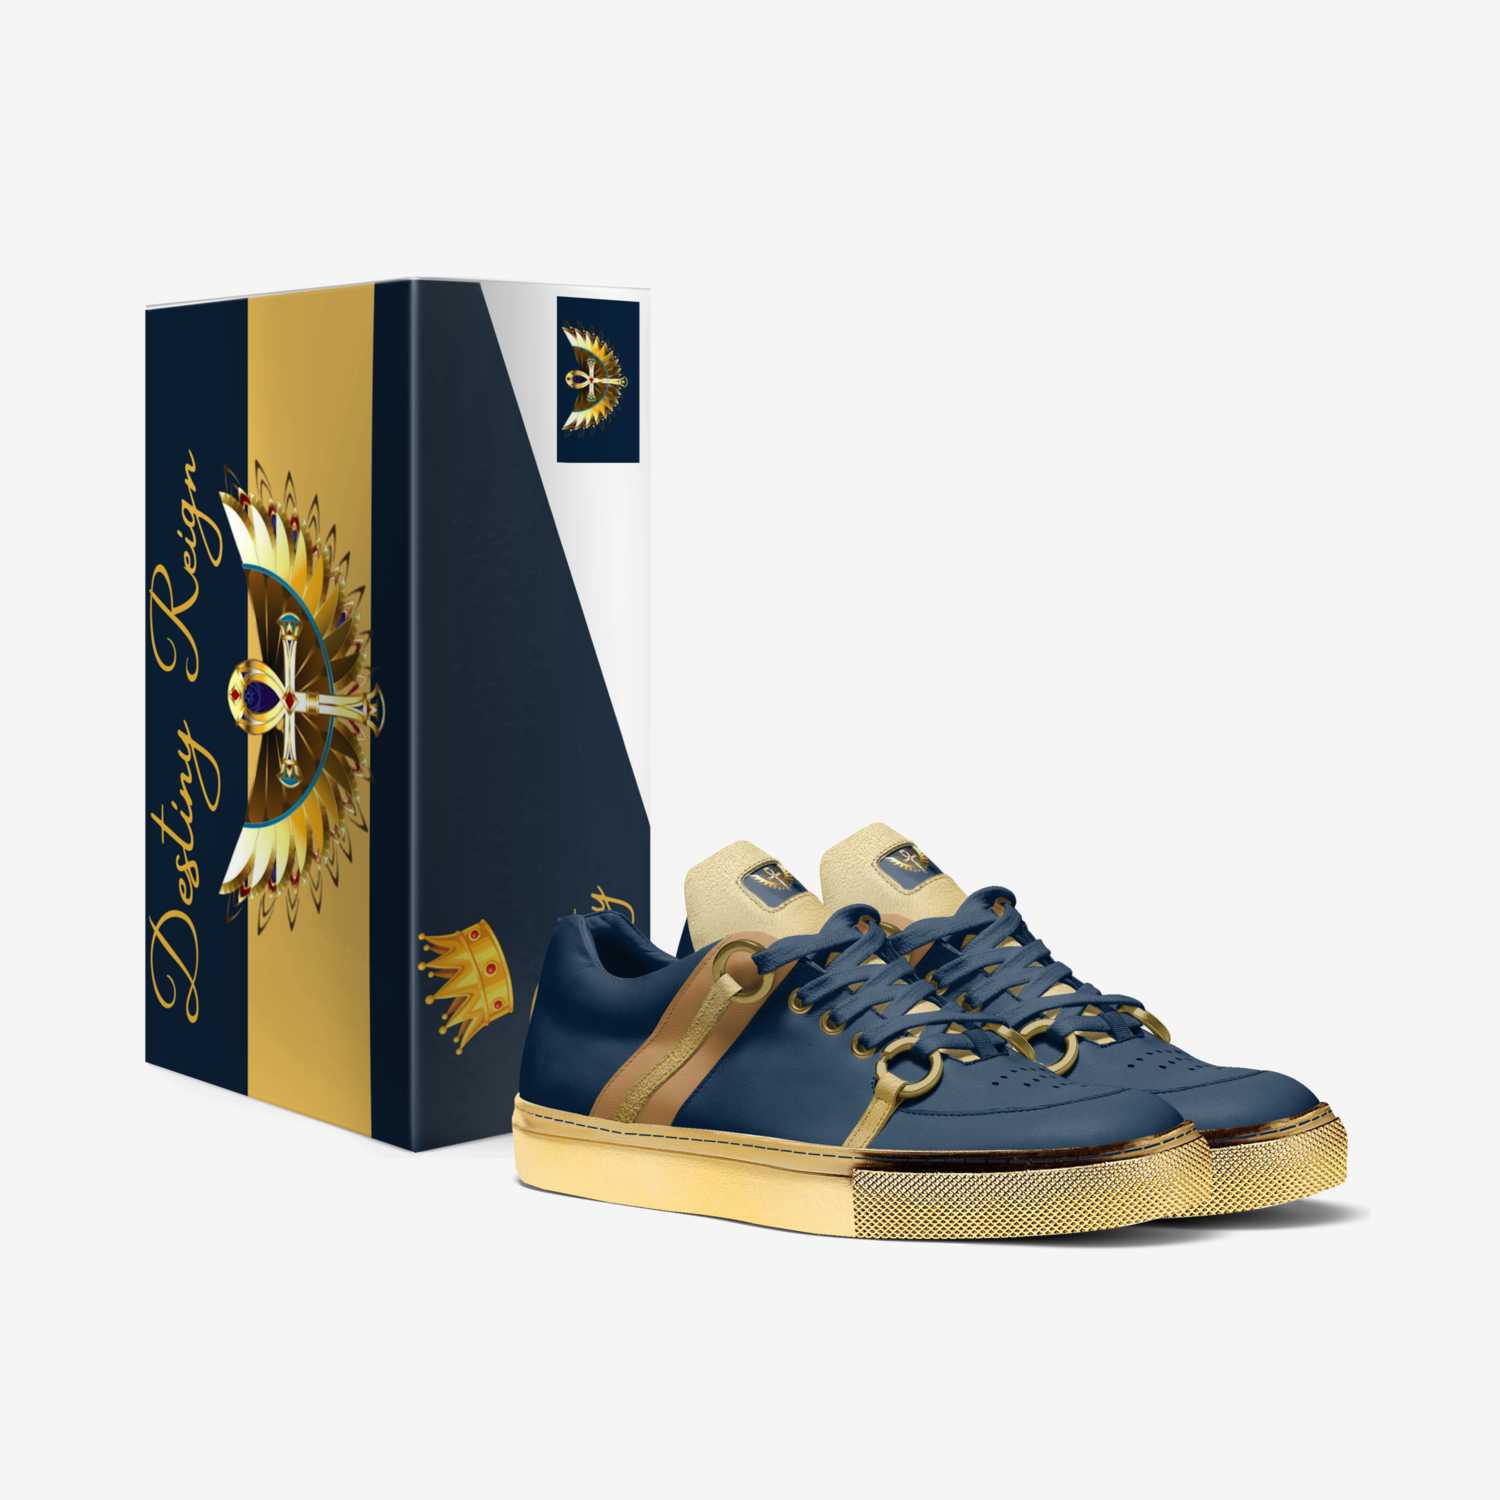 Royalty Reign 4 custom made in Italy shoes by Edo Walker | Box view